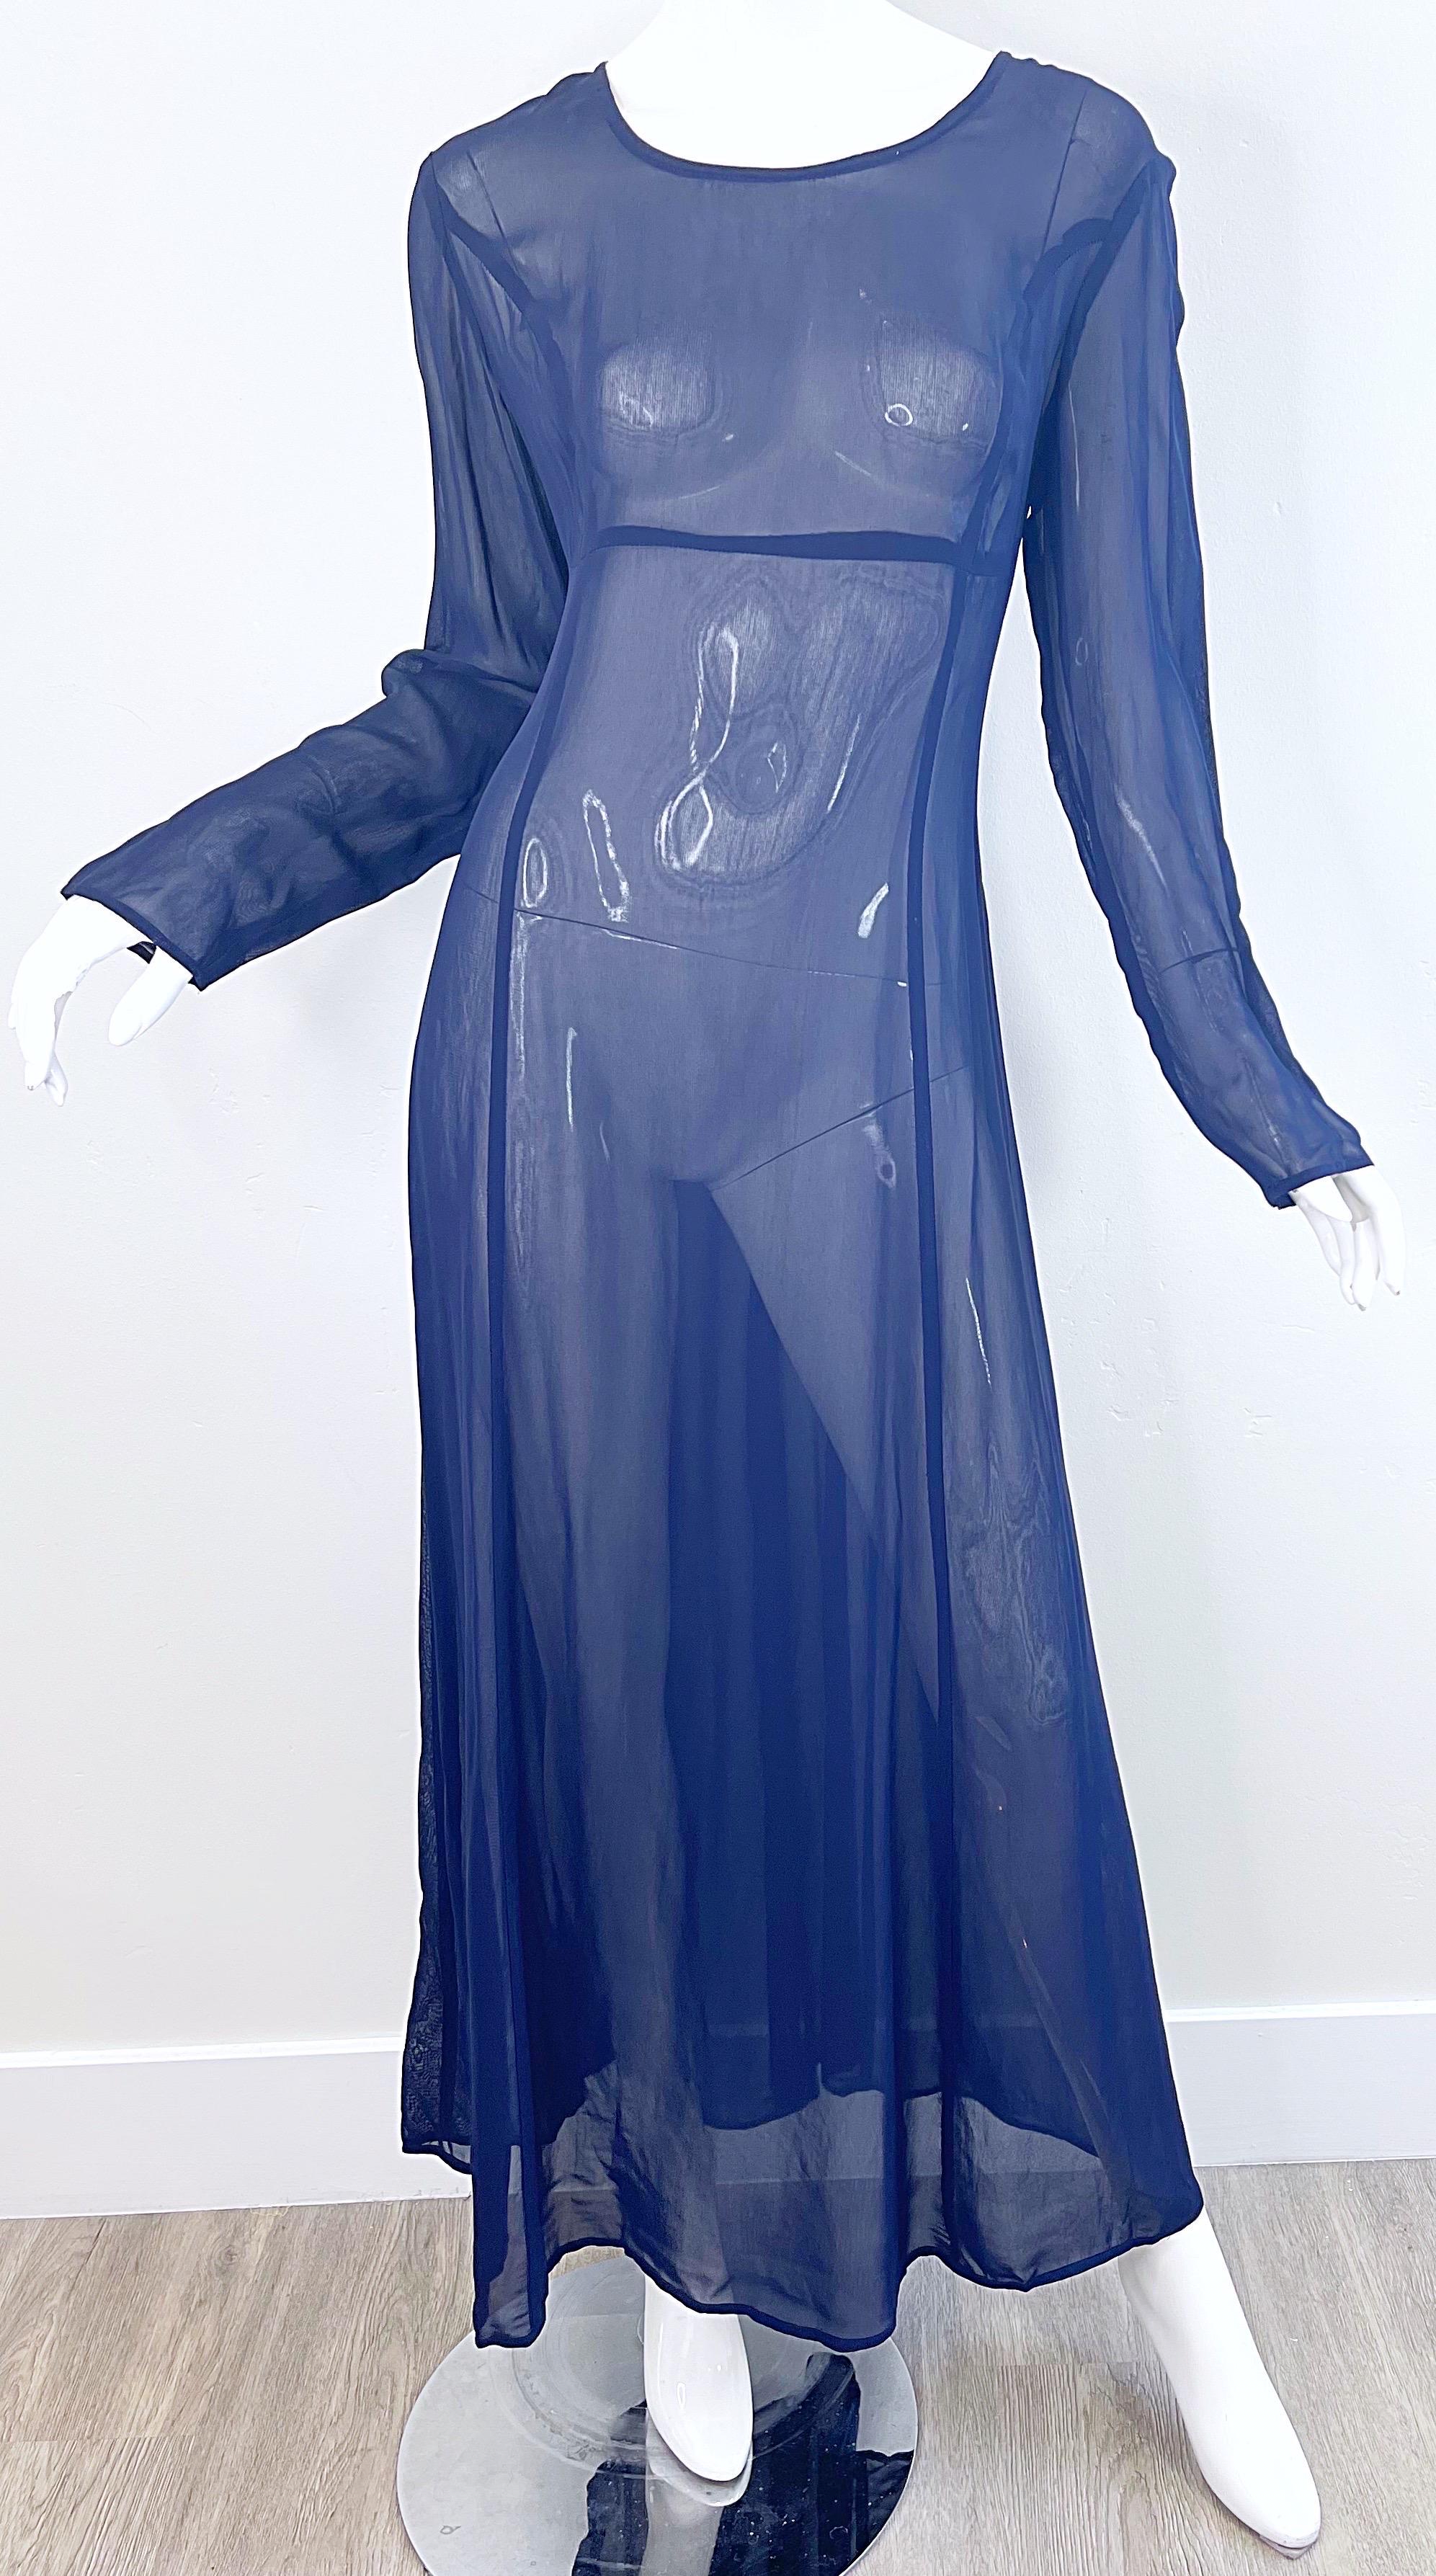 NWT 1990s I Magnin Size 10 Sheer Navy Blue Long Sleeve Vintage 90s Maxi Dress For Sale 8